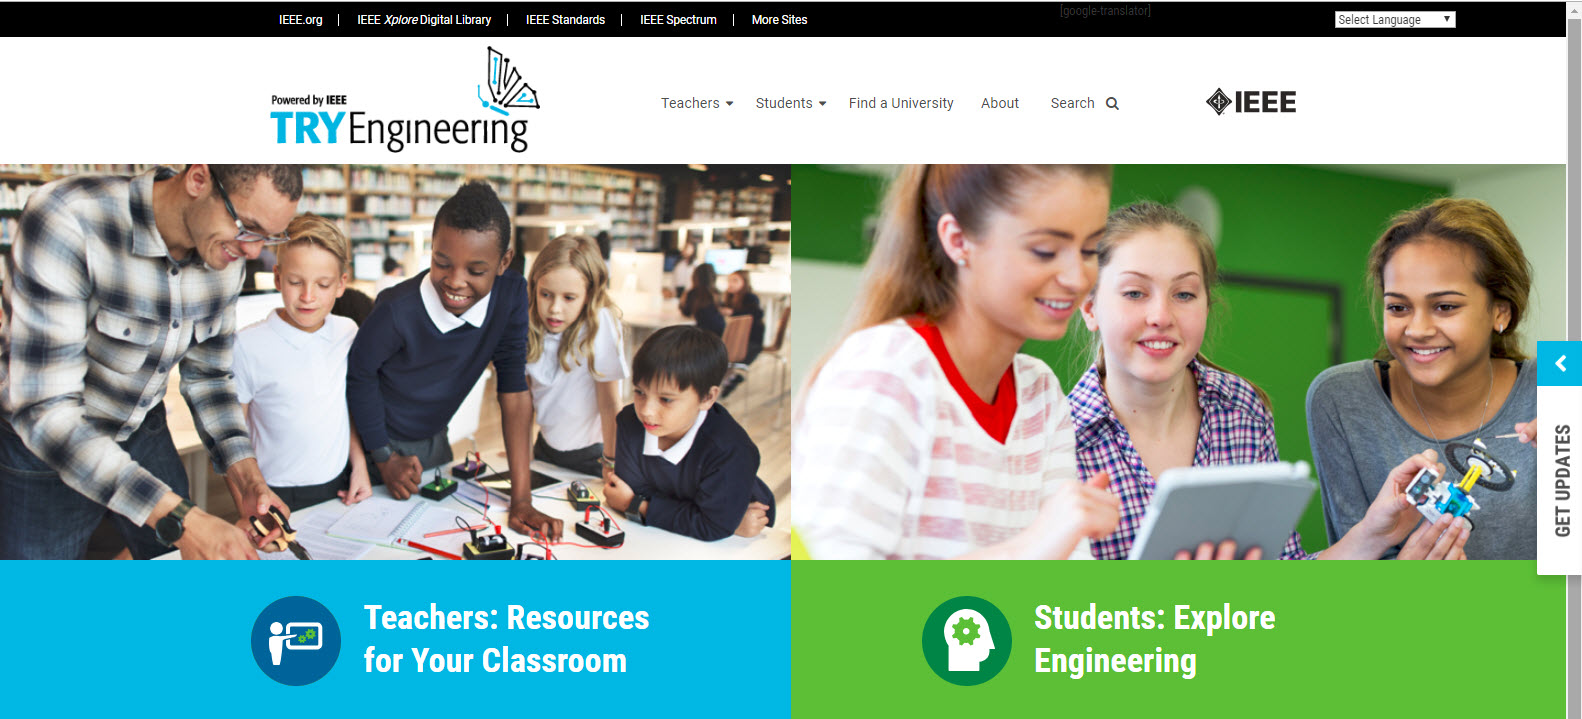 image of tryengineering.org website home page